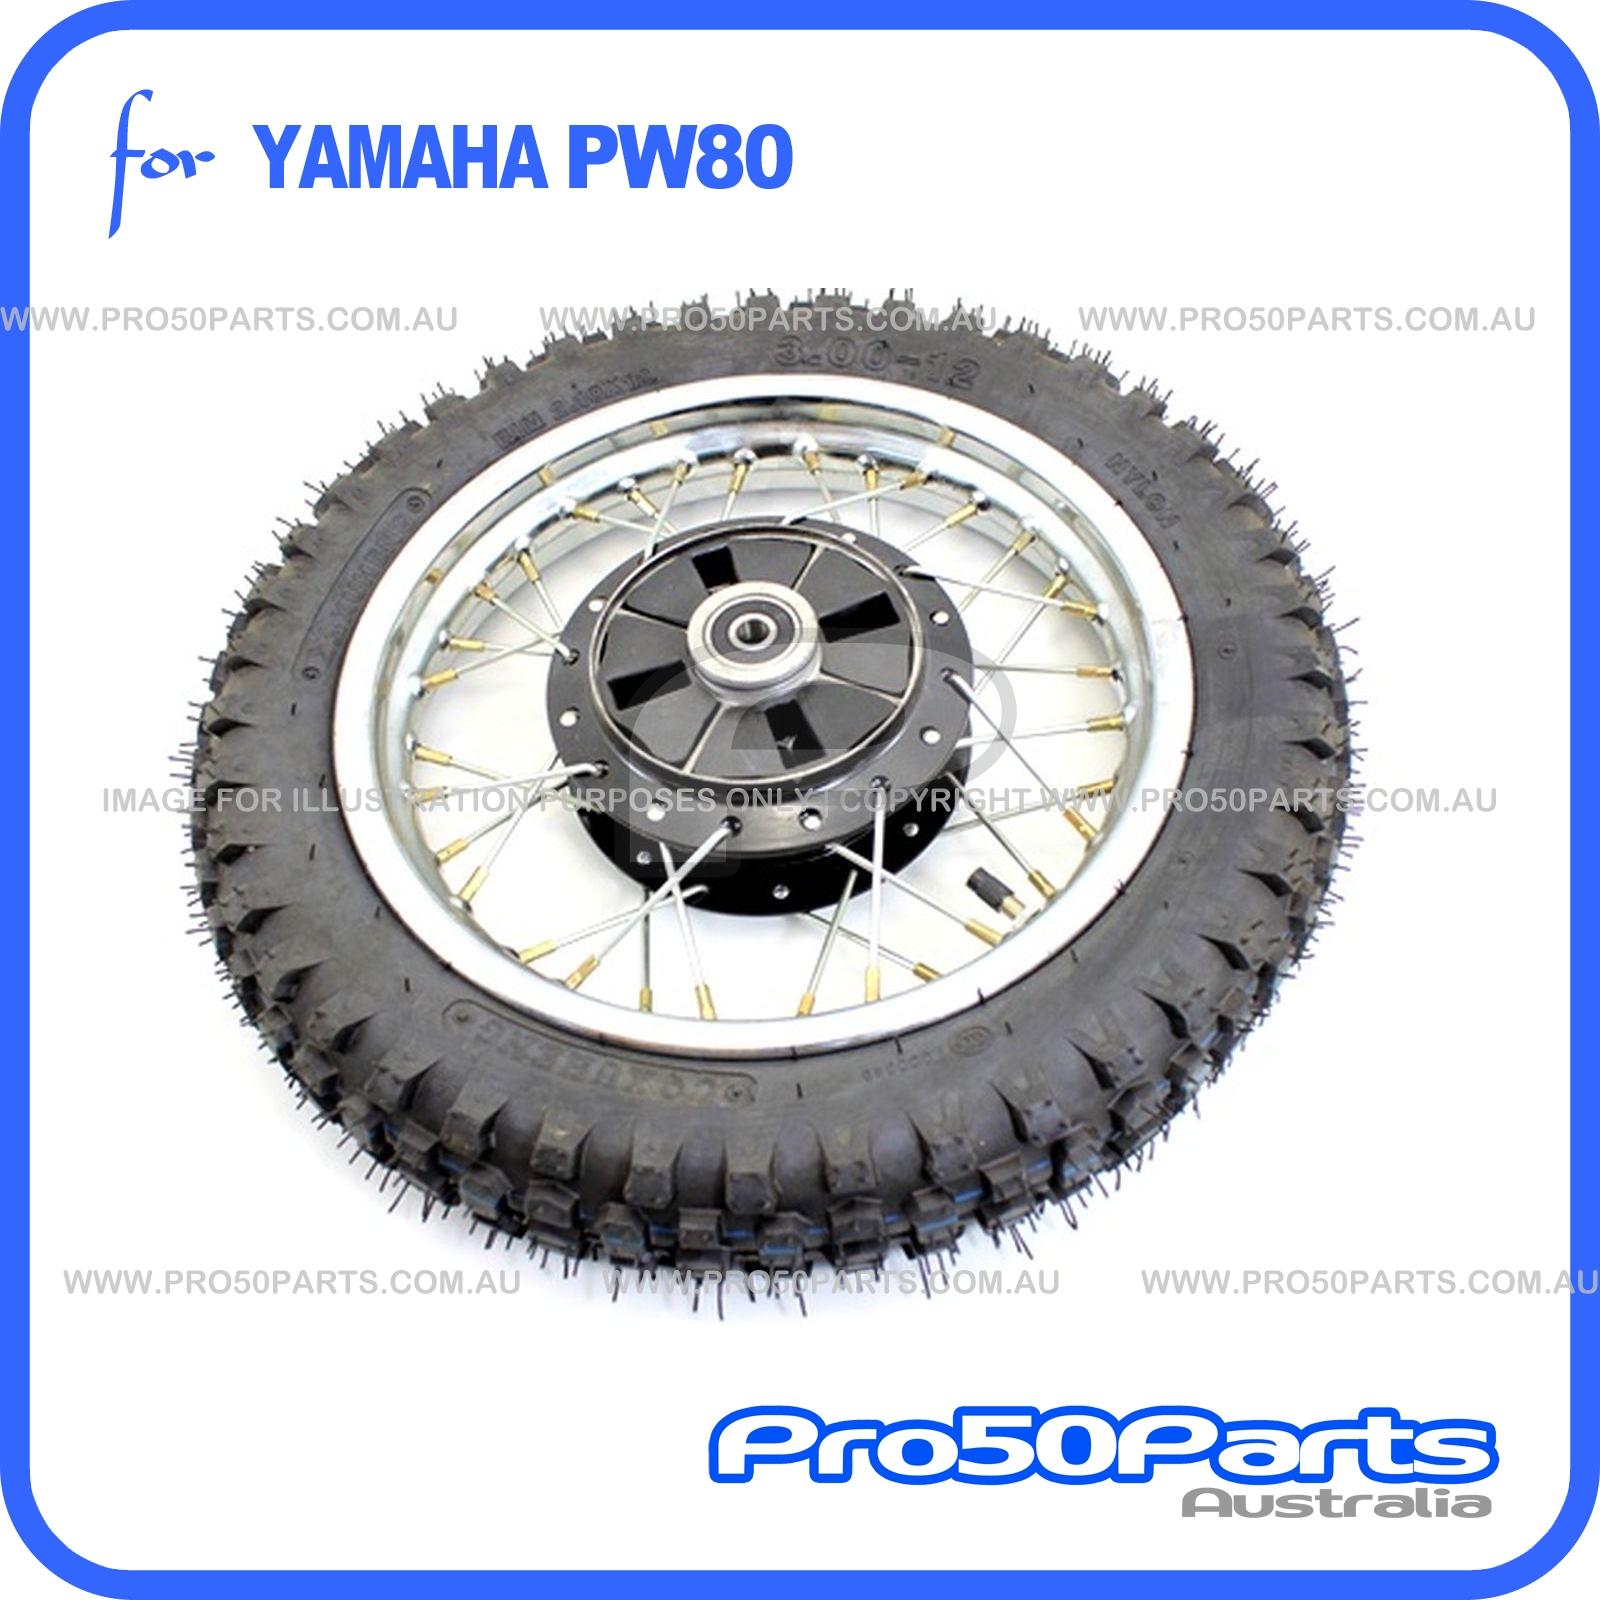 Front brake Pad Shoes for Yamaha PeeWee PW PY 80 Y-Zinger Loncin PY80 GTMOTOR